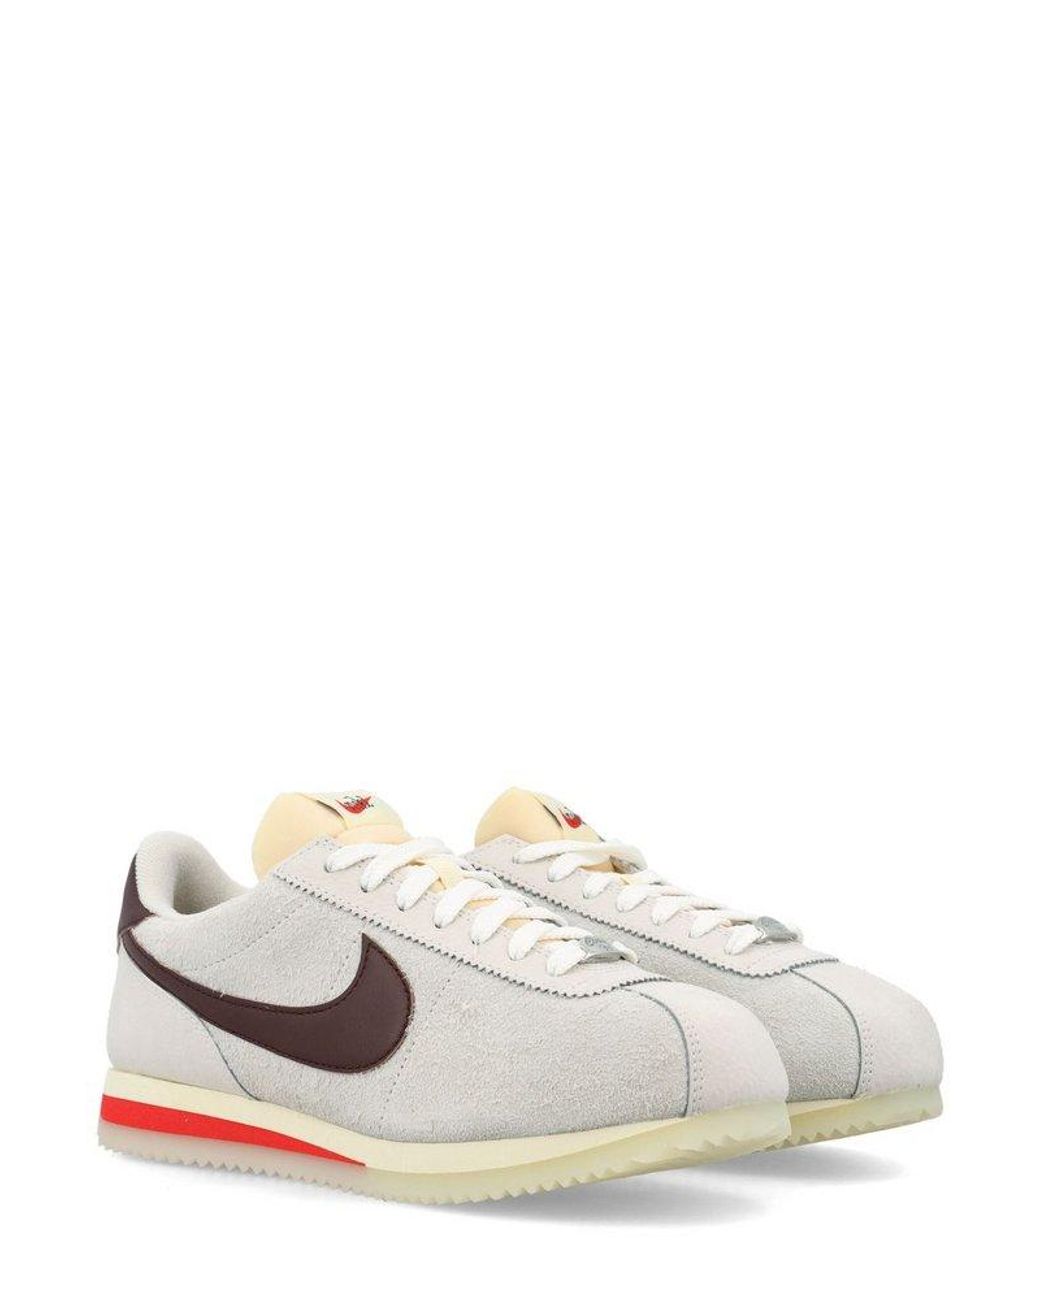 Nike Cortez 23 Lace-up Sneakers in White | Lyst UK